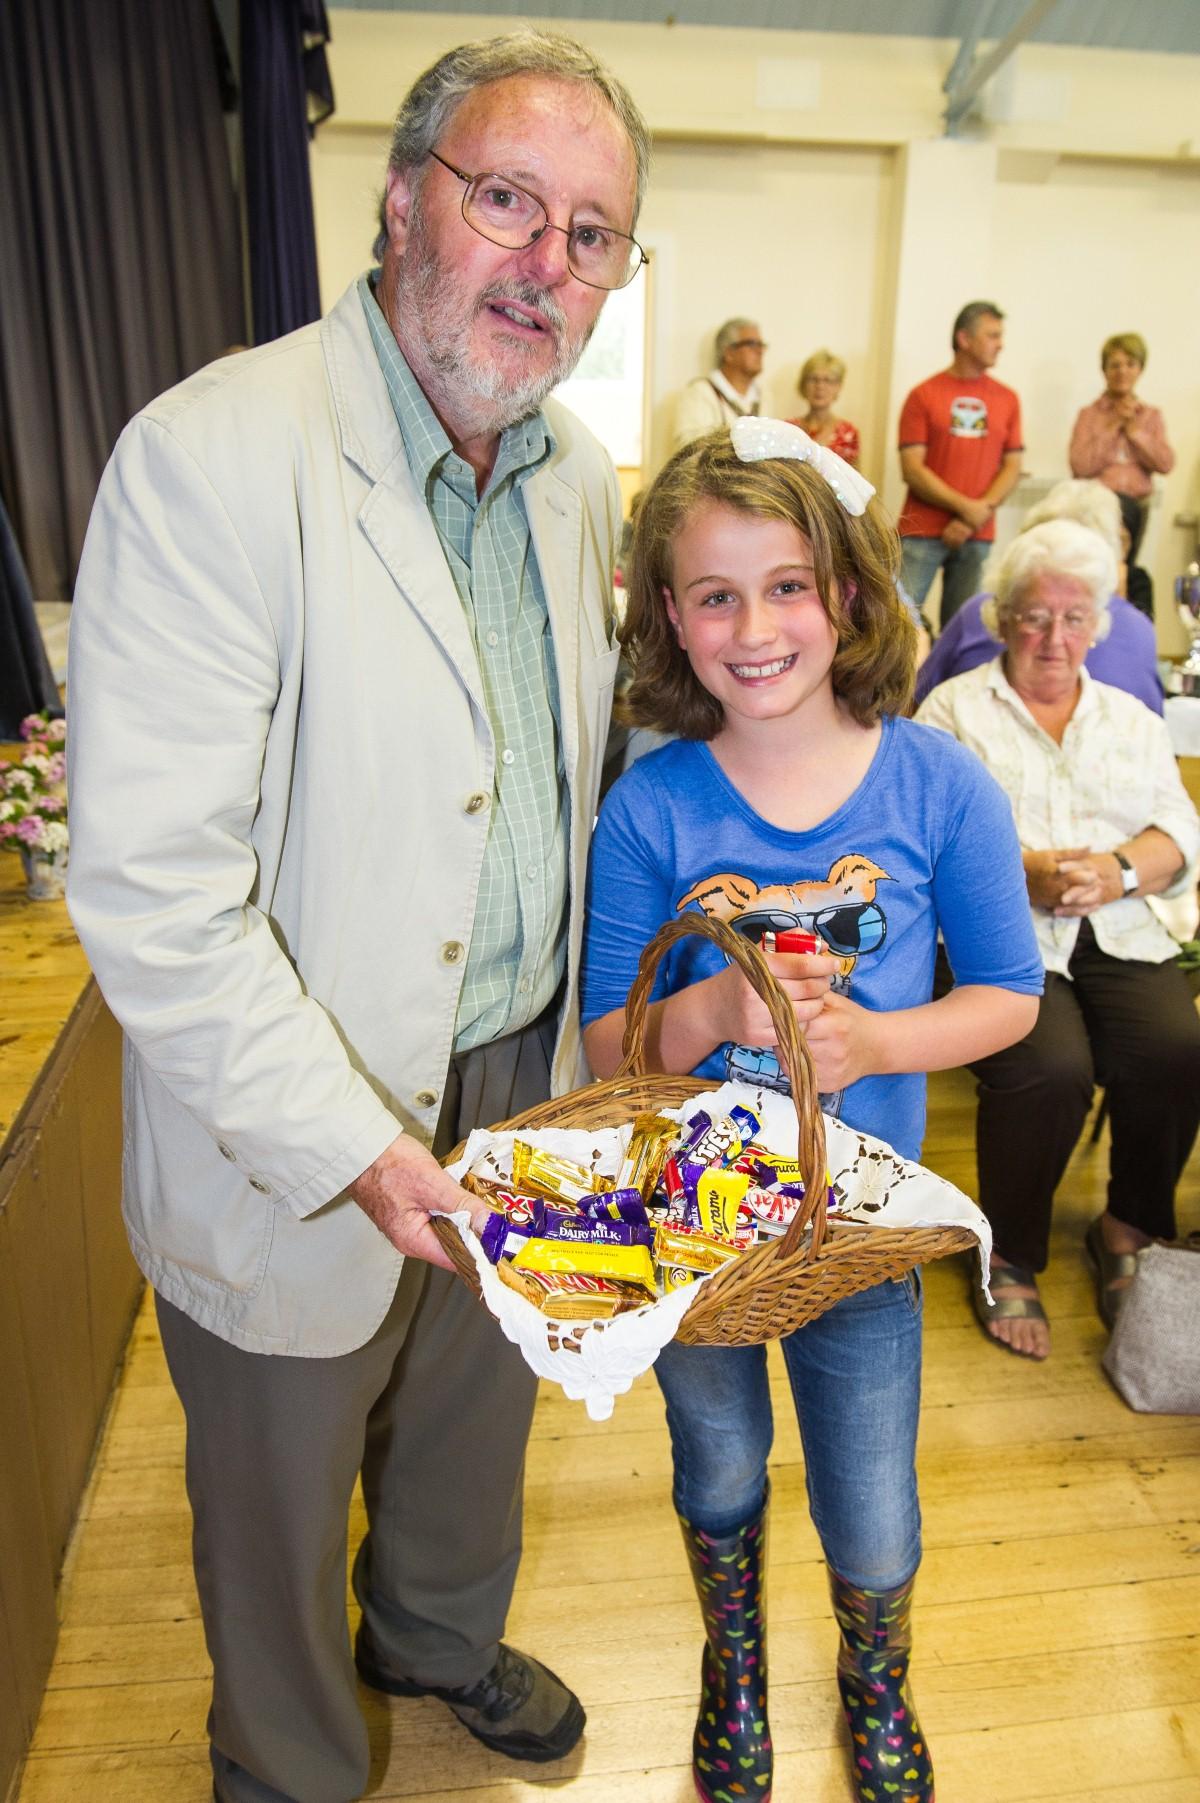 Picture from the Ropley Horticultural Show